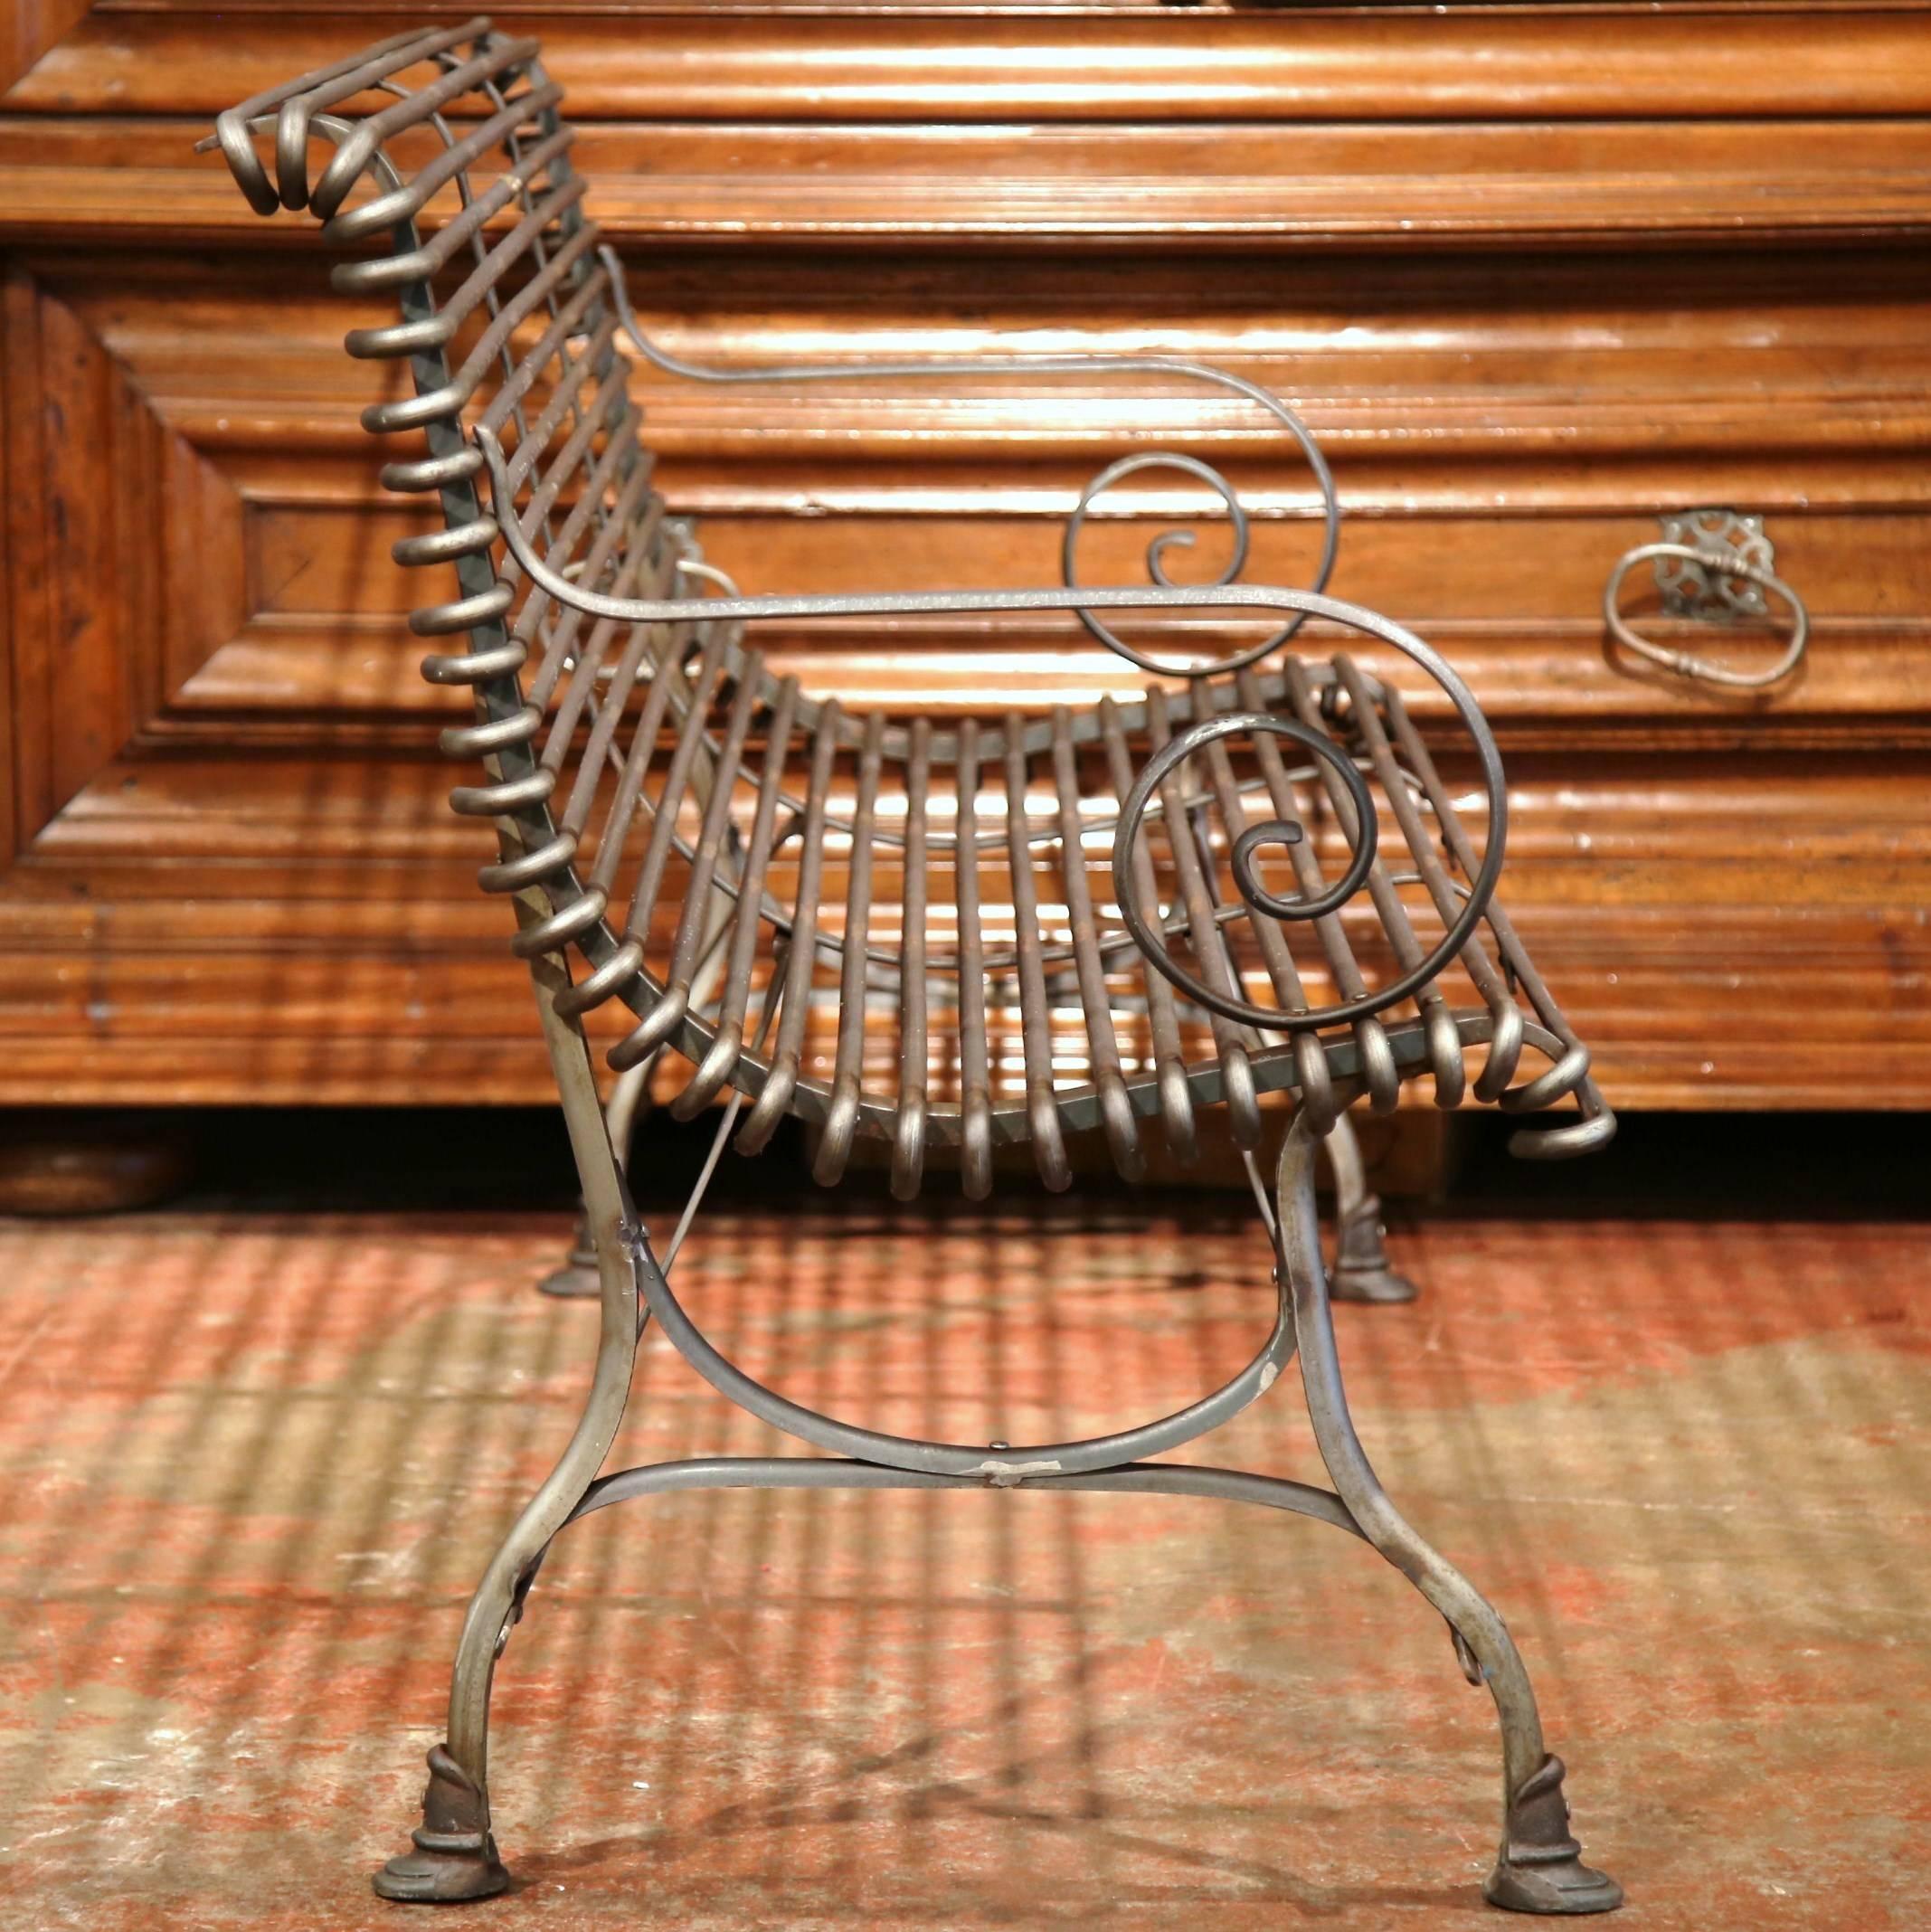 French Polished Iron Bench with Scrolled Arms and Hoof Feet Signed Sauveur Arras 4